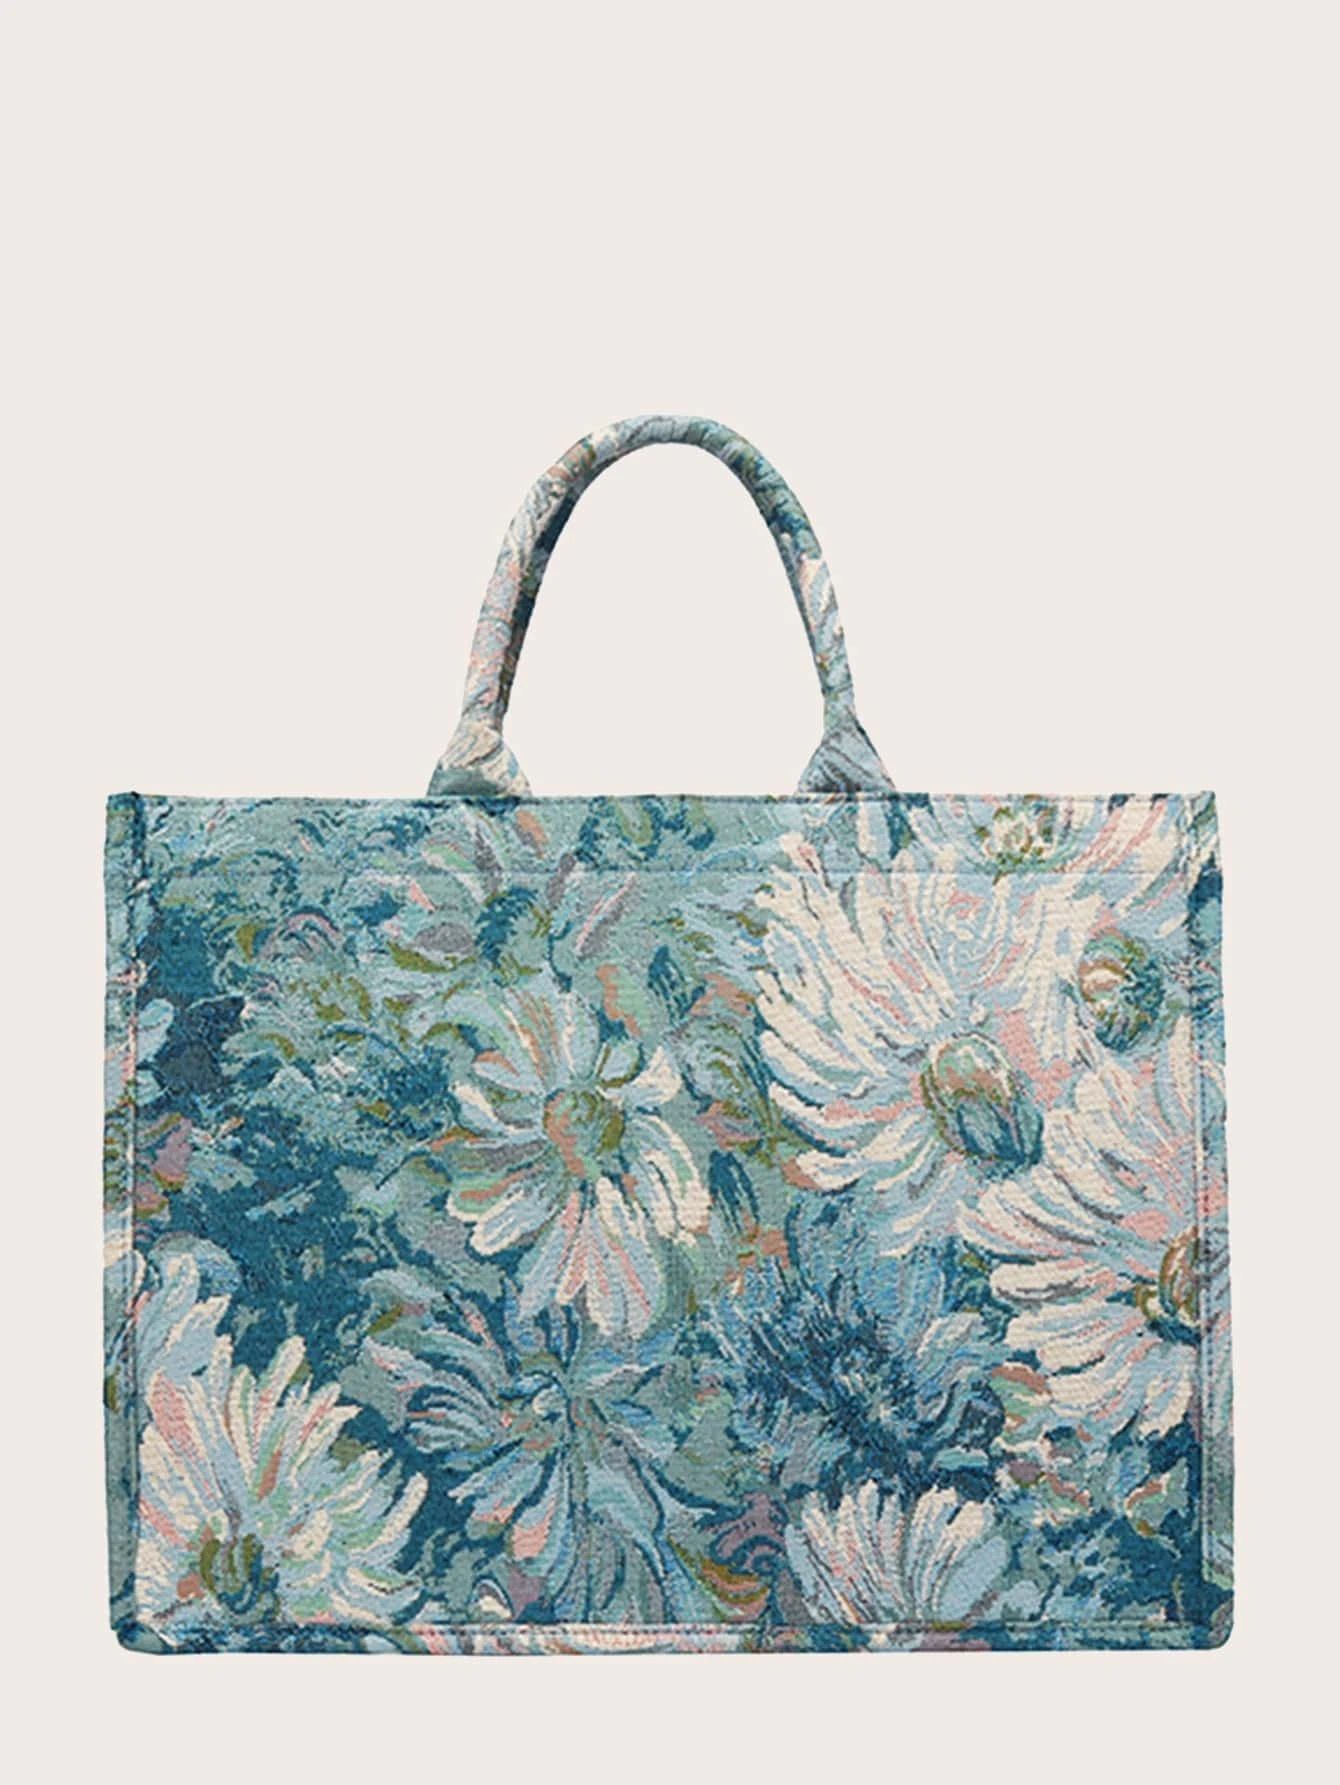 EMERY ROSE Floral Graphic Tote Bag | SHEIN